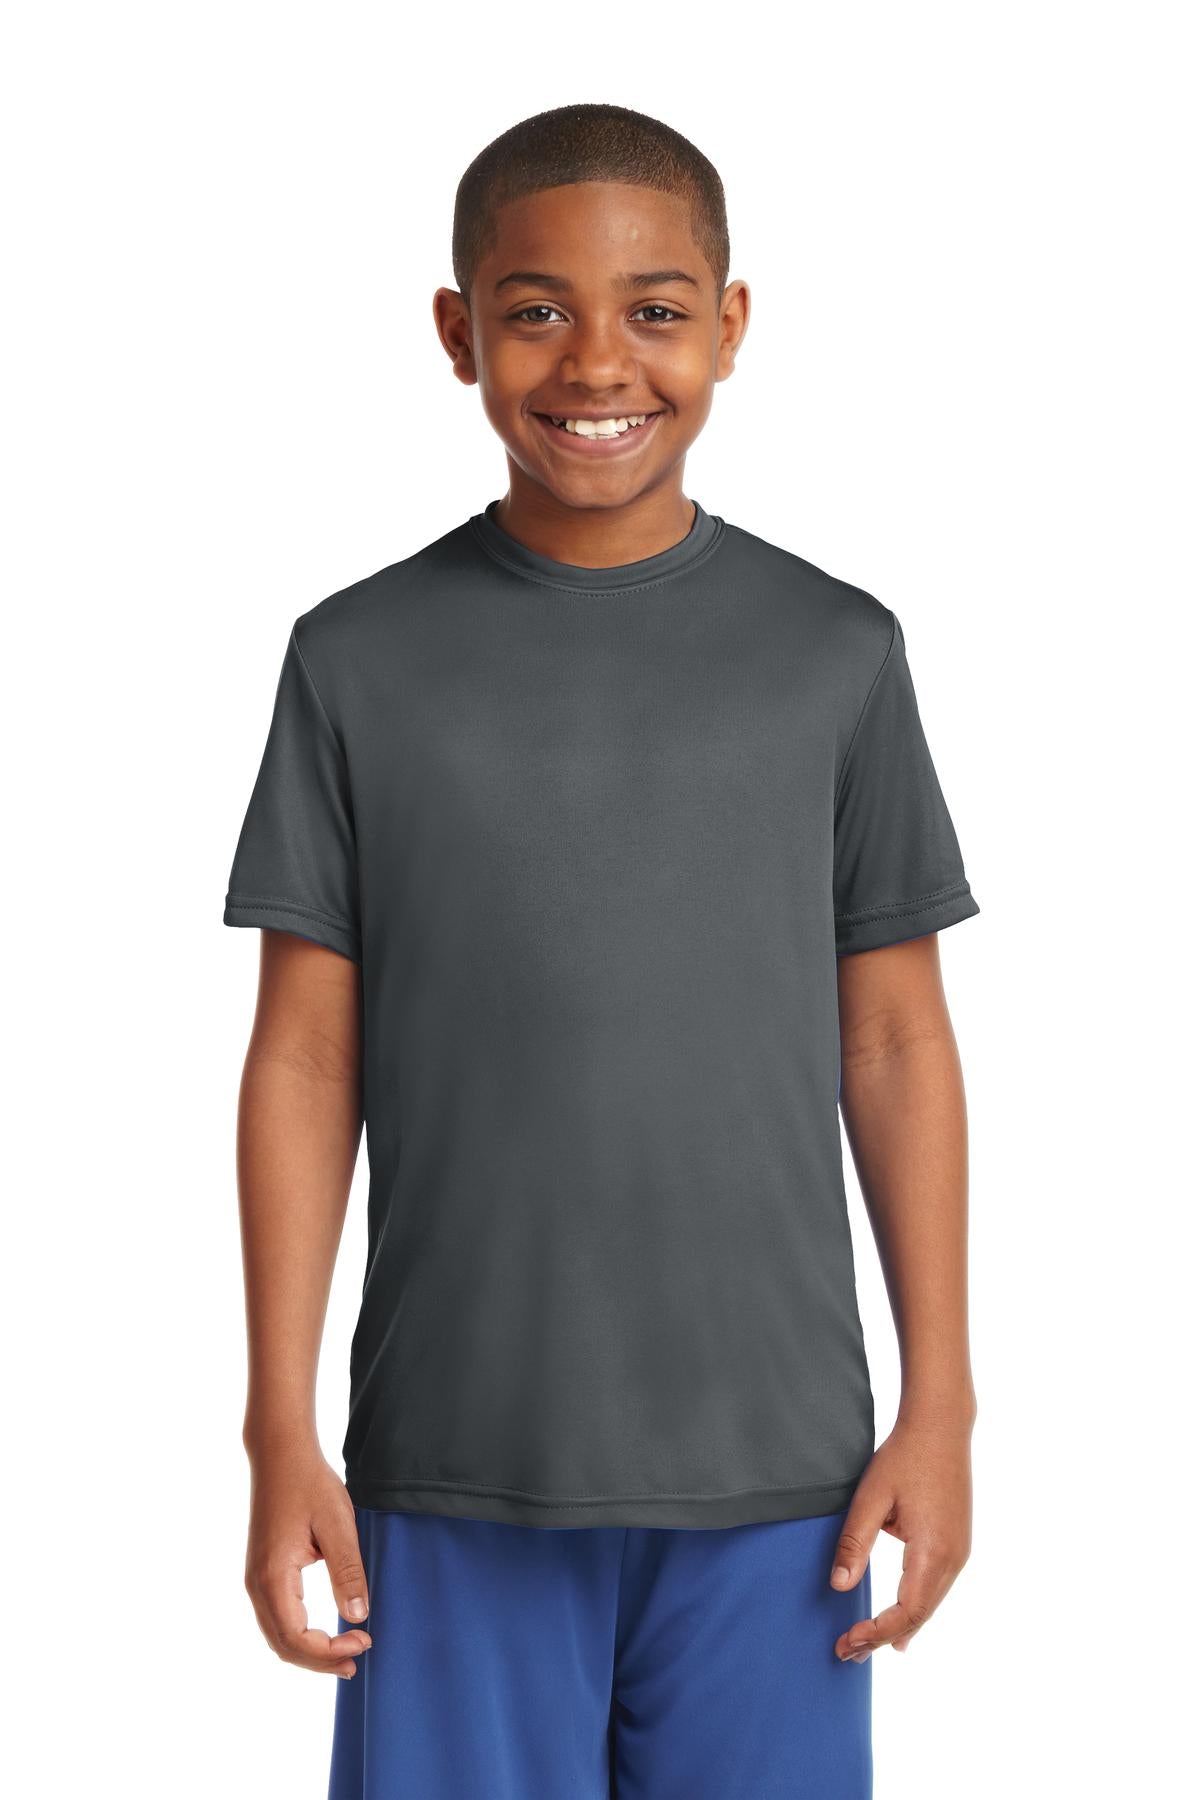 Sport-Tek Youth PosiCharge Competitor™ Tee. YST350